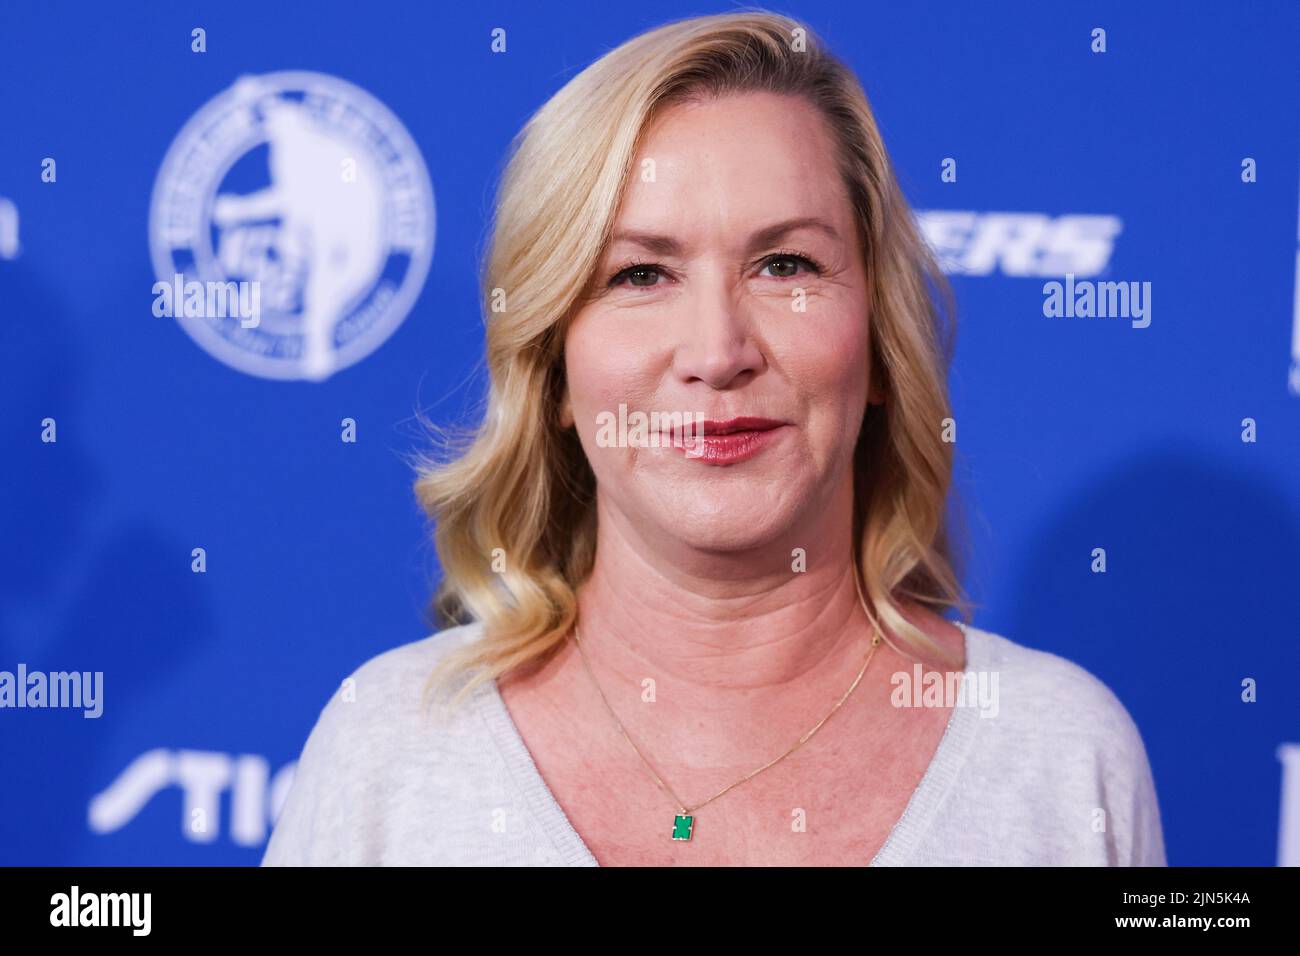 ELYSIAN PARK, LOS ANGELES, CALIFORNIA, USA - AUGUST 08: American actress Angela Kinsey arrives at Kershaw's Challenge Ping Pong 4 Purpose 2022 held at Dodger Stadium on August 8, 2022 in Elysian Park, Los Angeles, California, United States. (Photo by Xavier Collin/Image Press Agency) Stock Photo